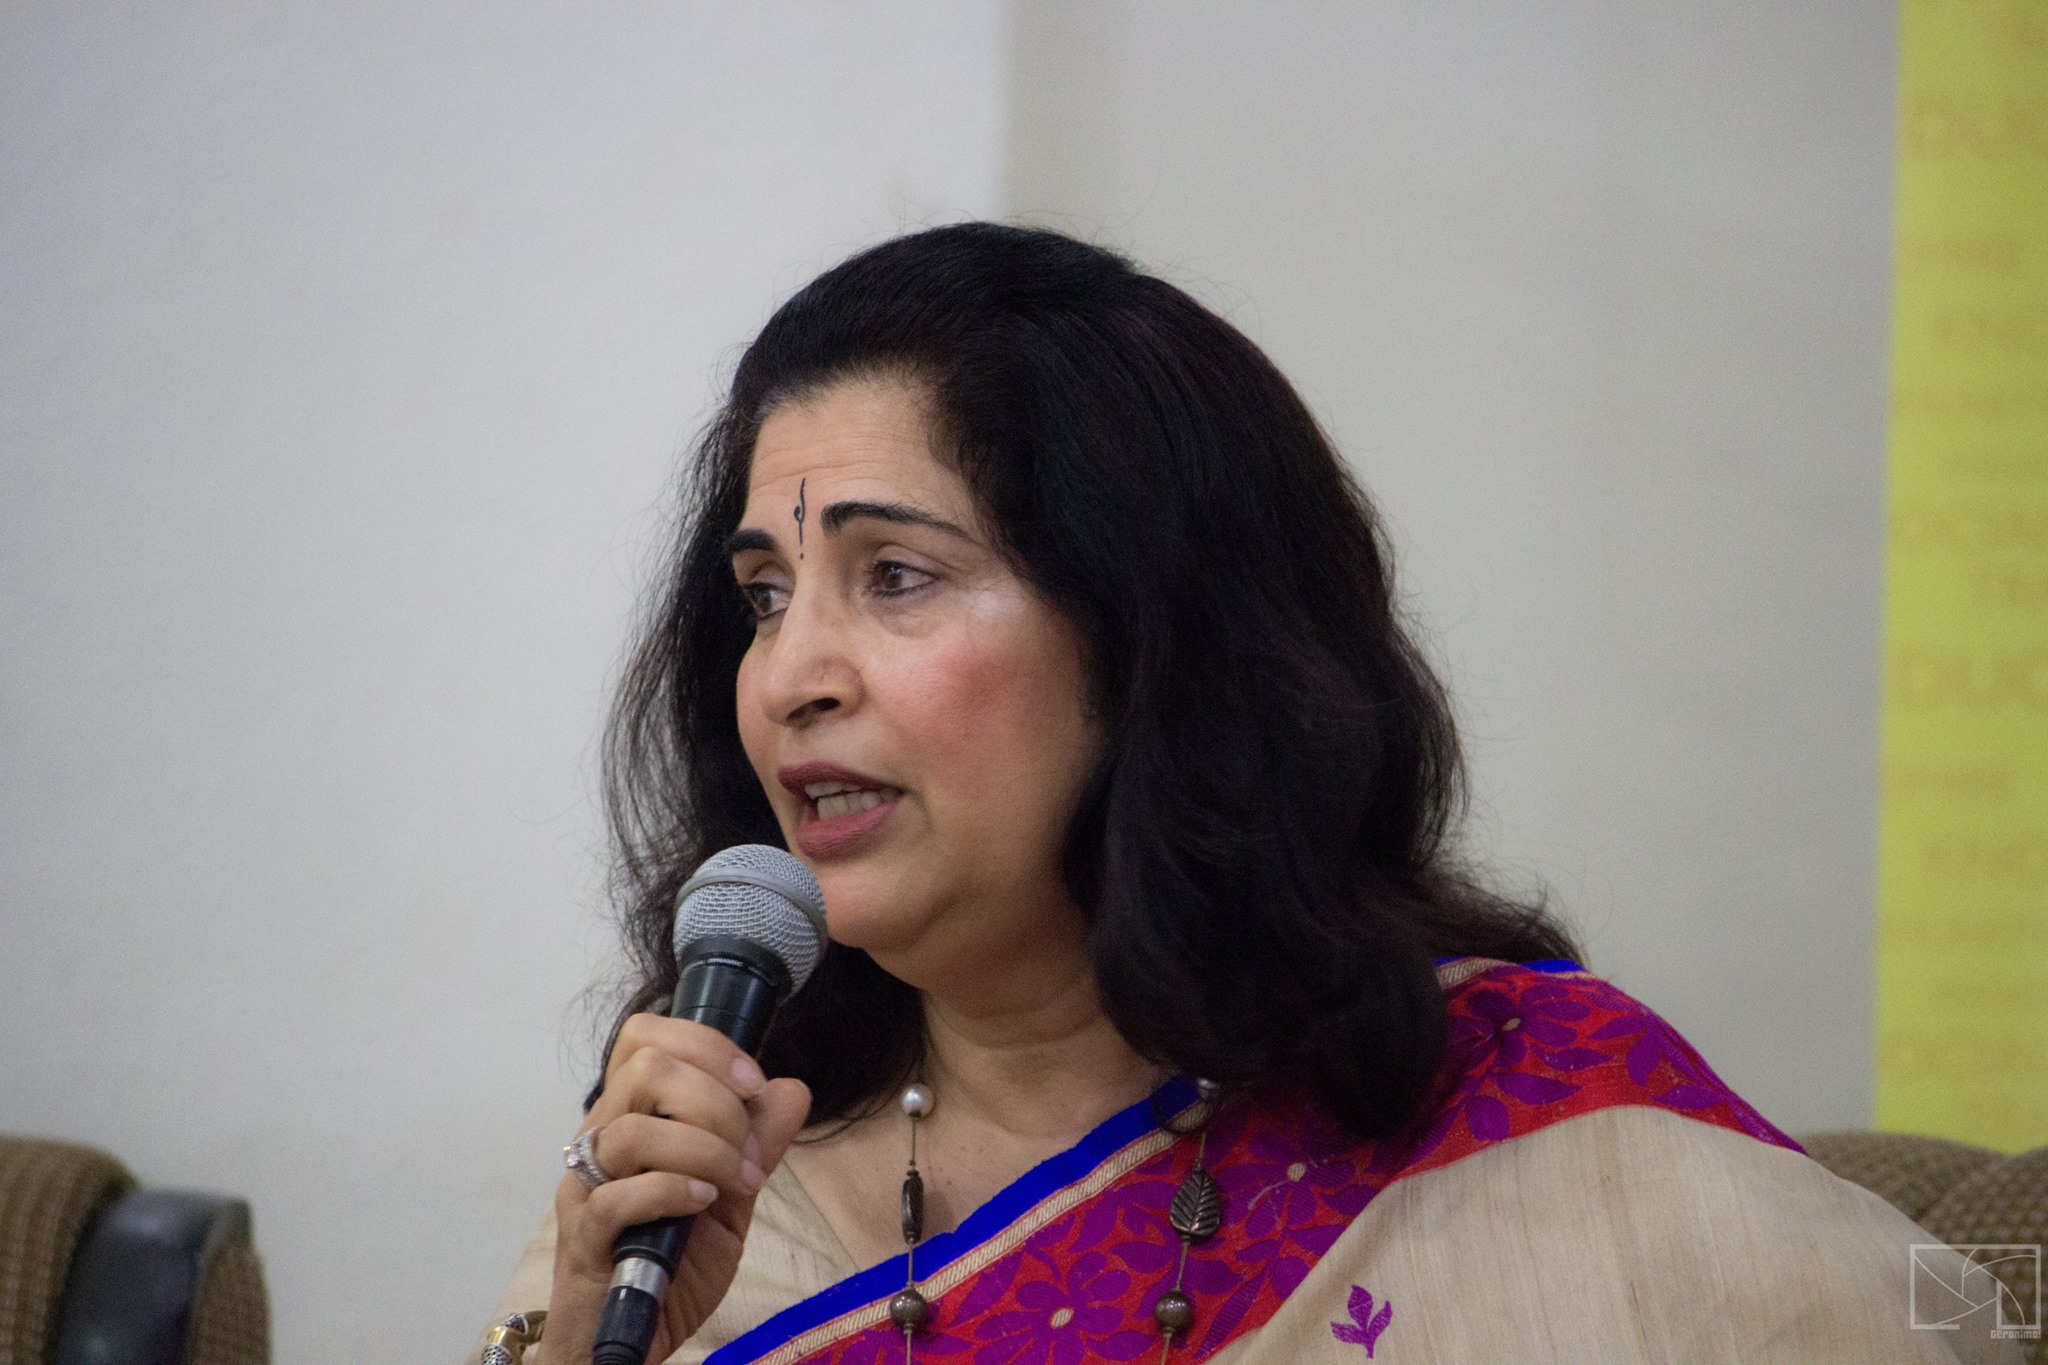 Dr Urvashi Sahni, who has founded the Study Hall Educational Foundation (SHEF) believes that education should not just enhance skills but also equip young women to face and overcome life’s challenges.